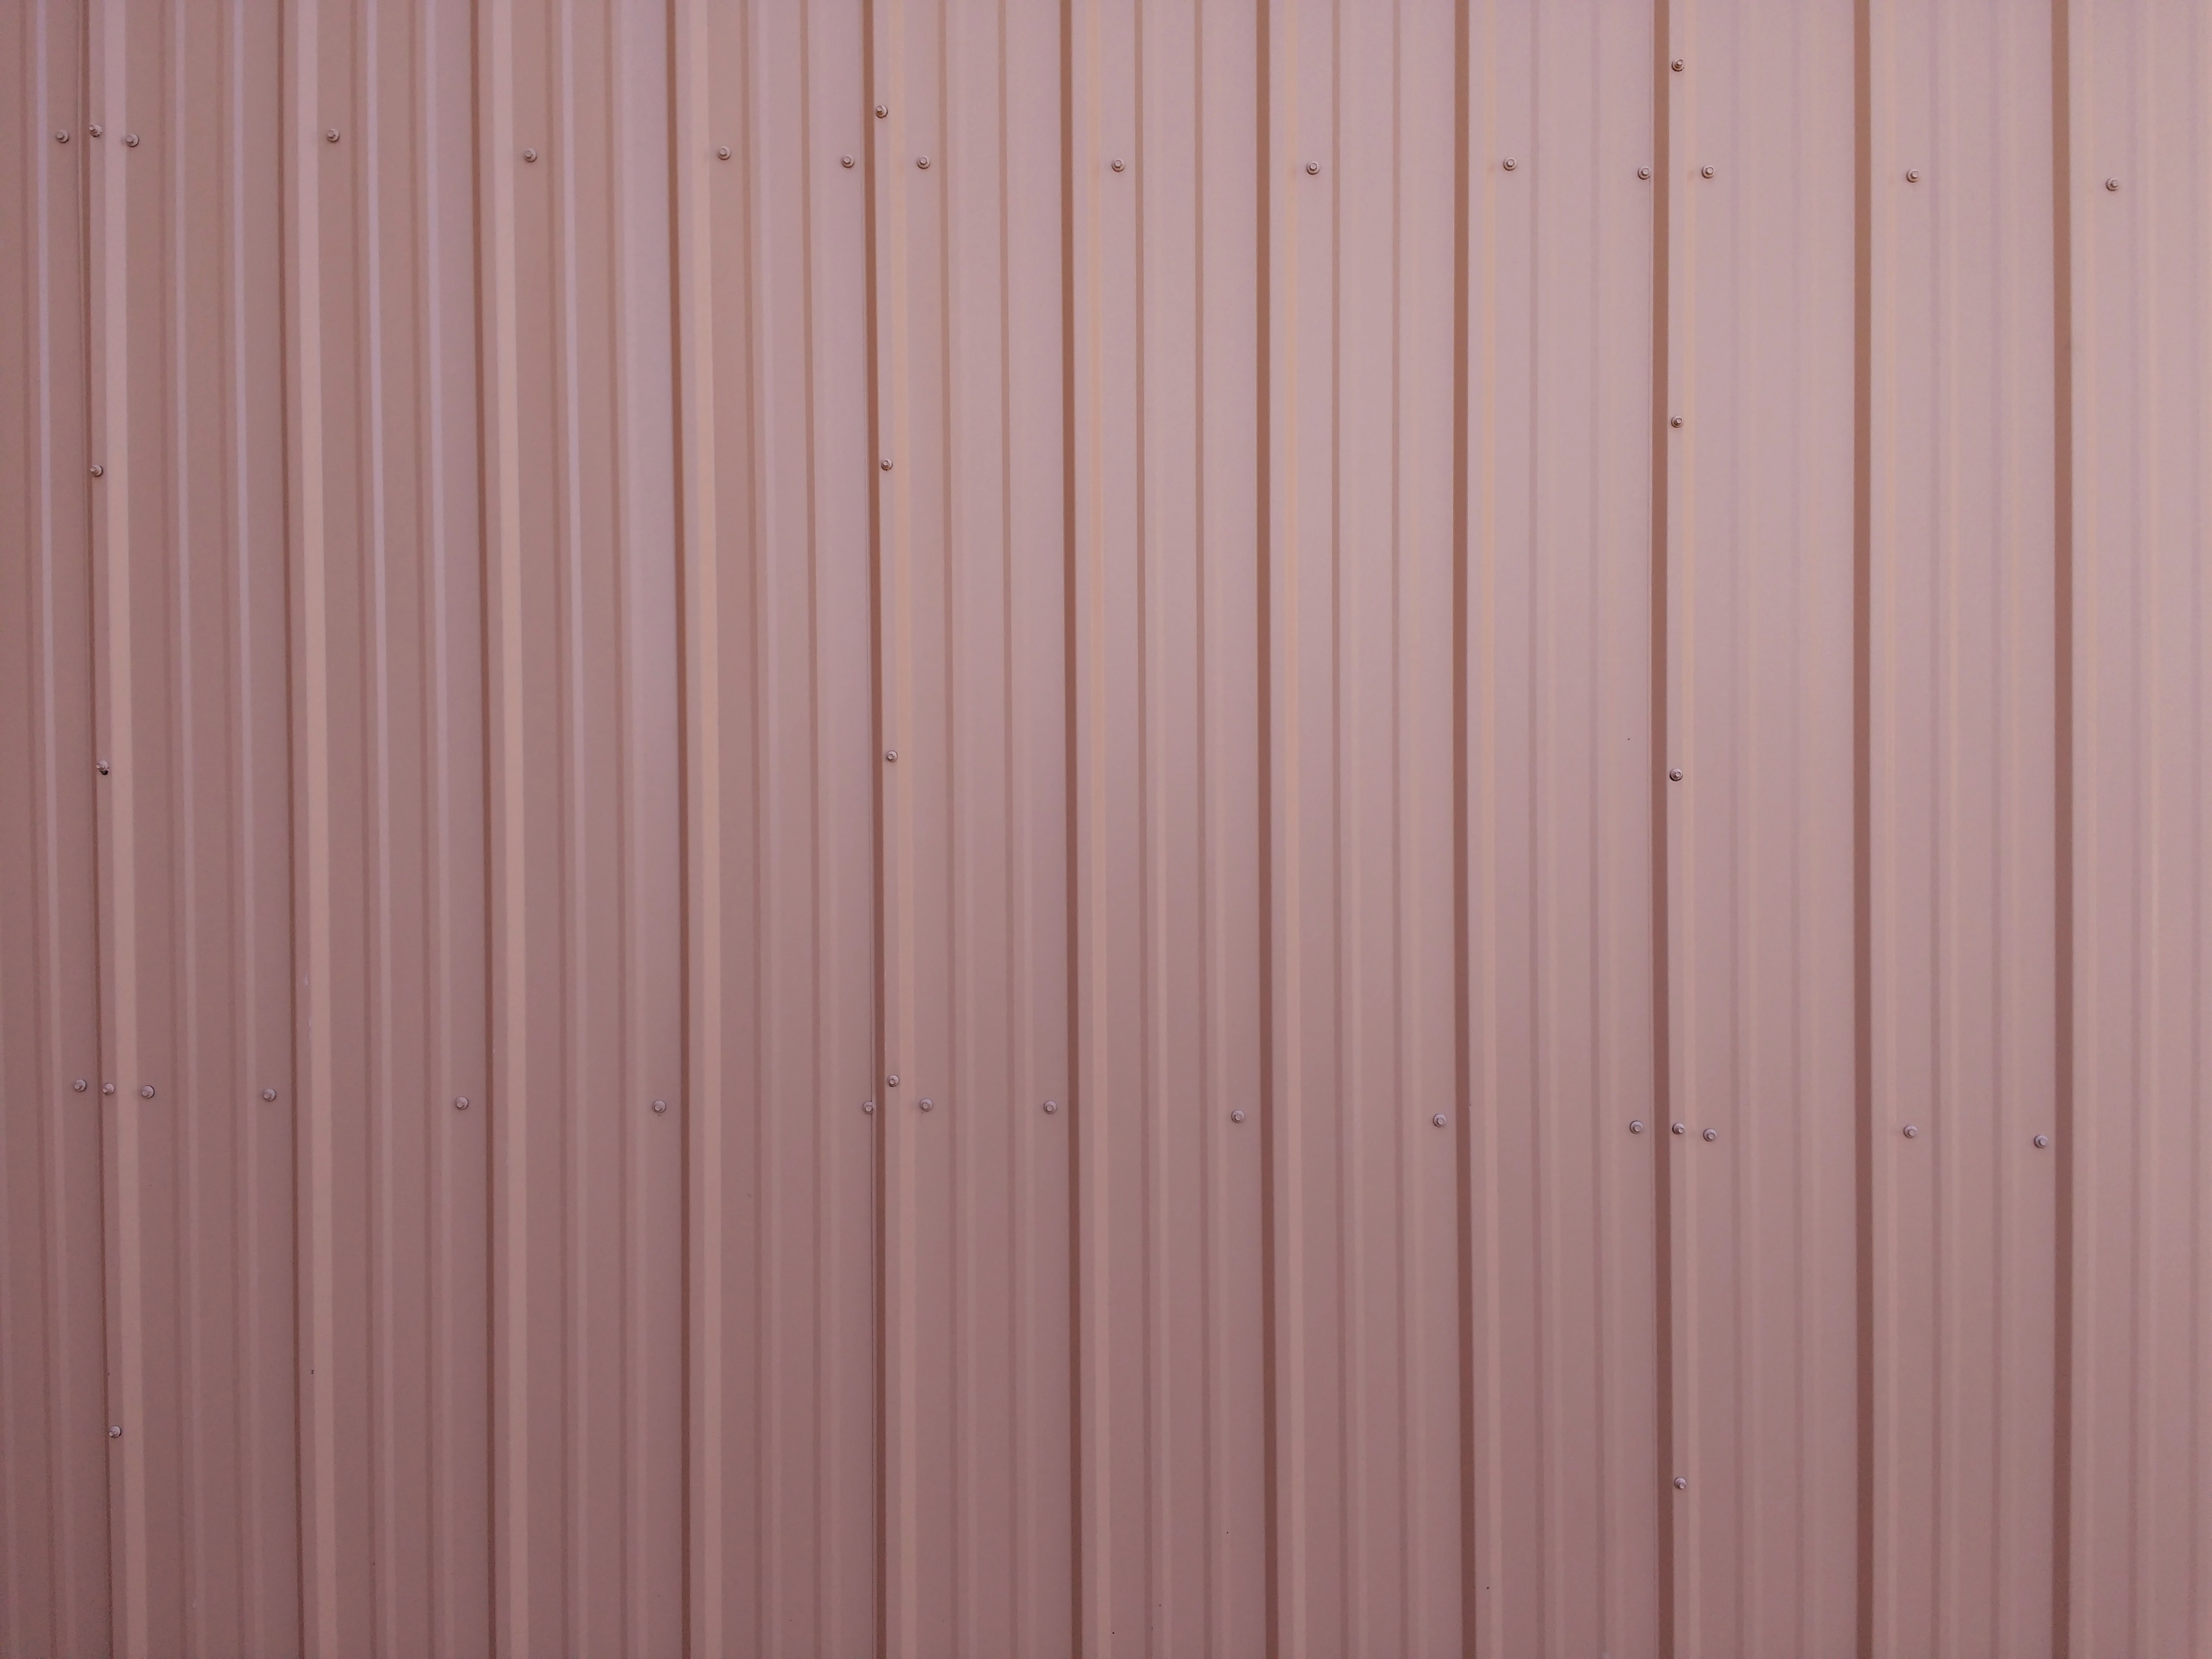 Ribbed Metal Siding Texture Red Picture Free Photograph Photos